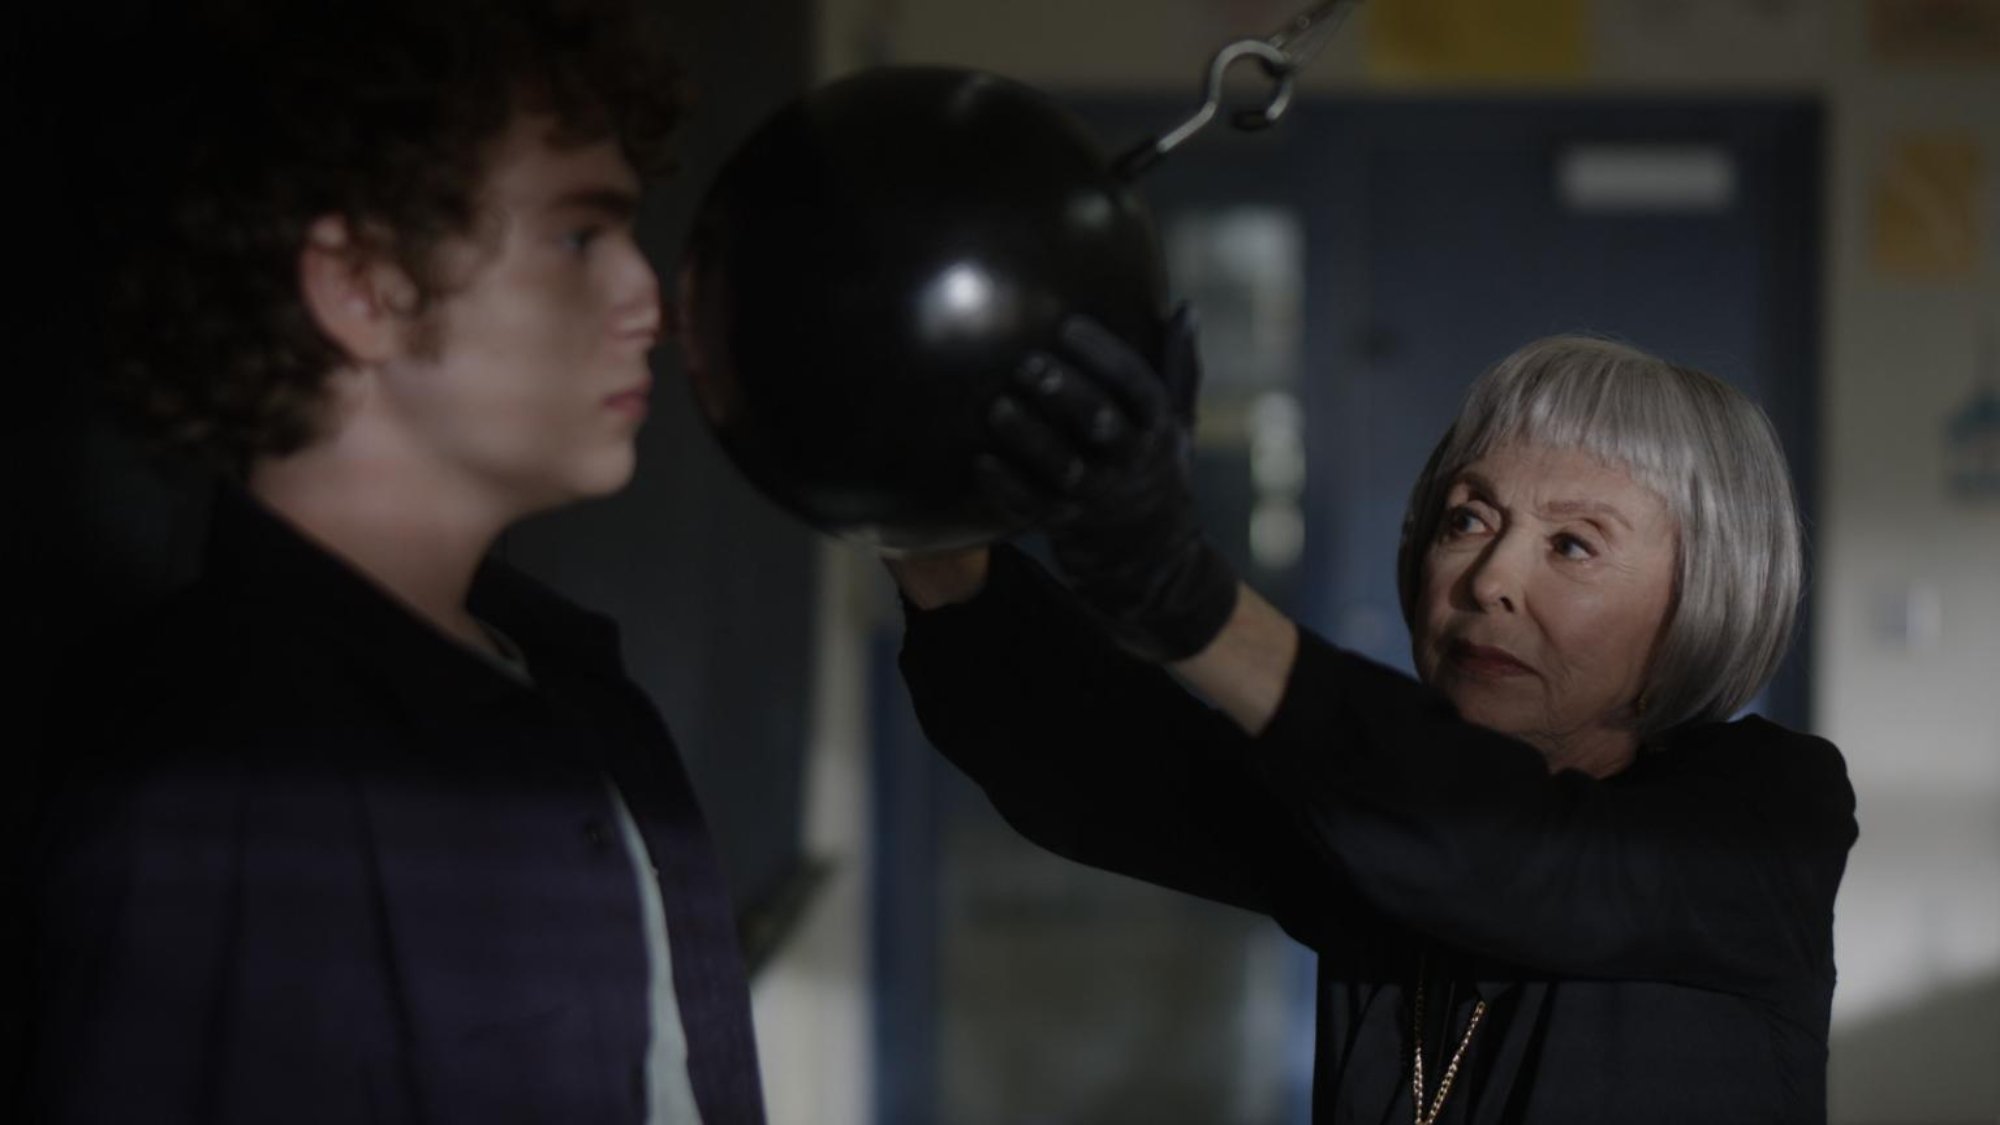 'The Prank' Connor Kalopsis as Ben and Rita Moreno as Mrs. Wheeler wearing black gloves and a big, black ball on a swinging pendulum in front of his face